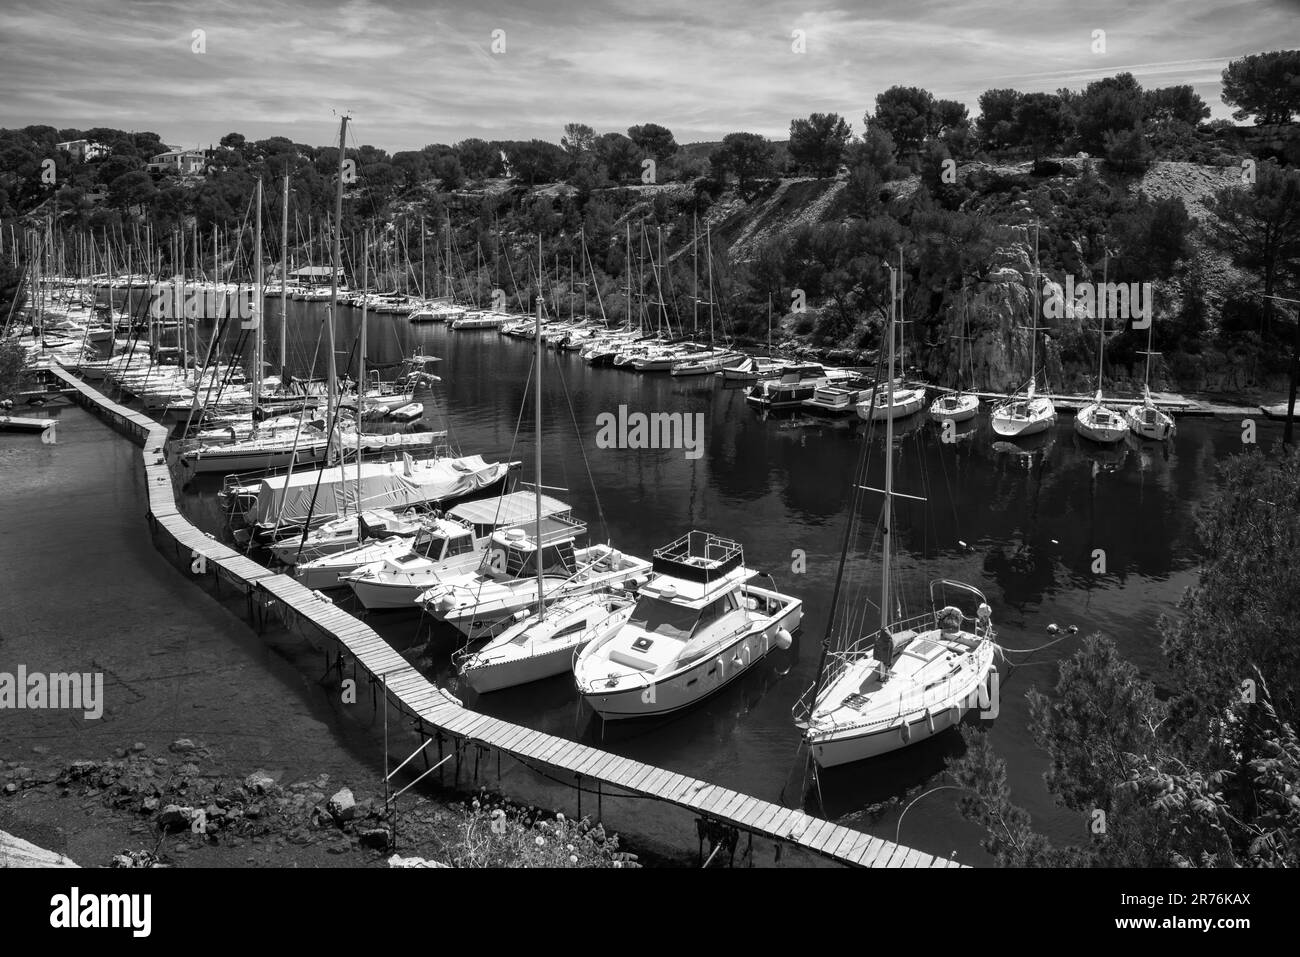 Sailing boats mooring in marina of Calanque de Port-Miou. Calanques National Park, Cassis, France. Black white historic photo Stock Photo